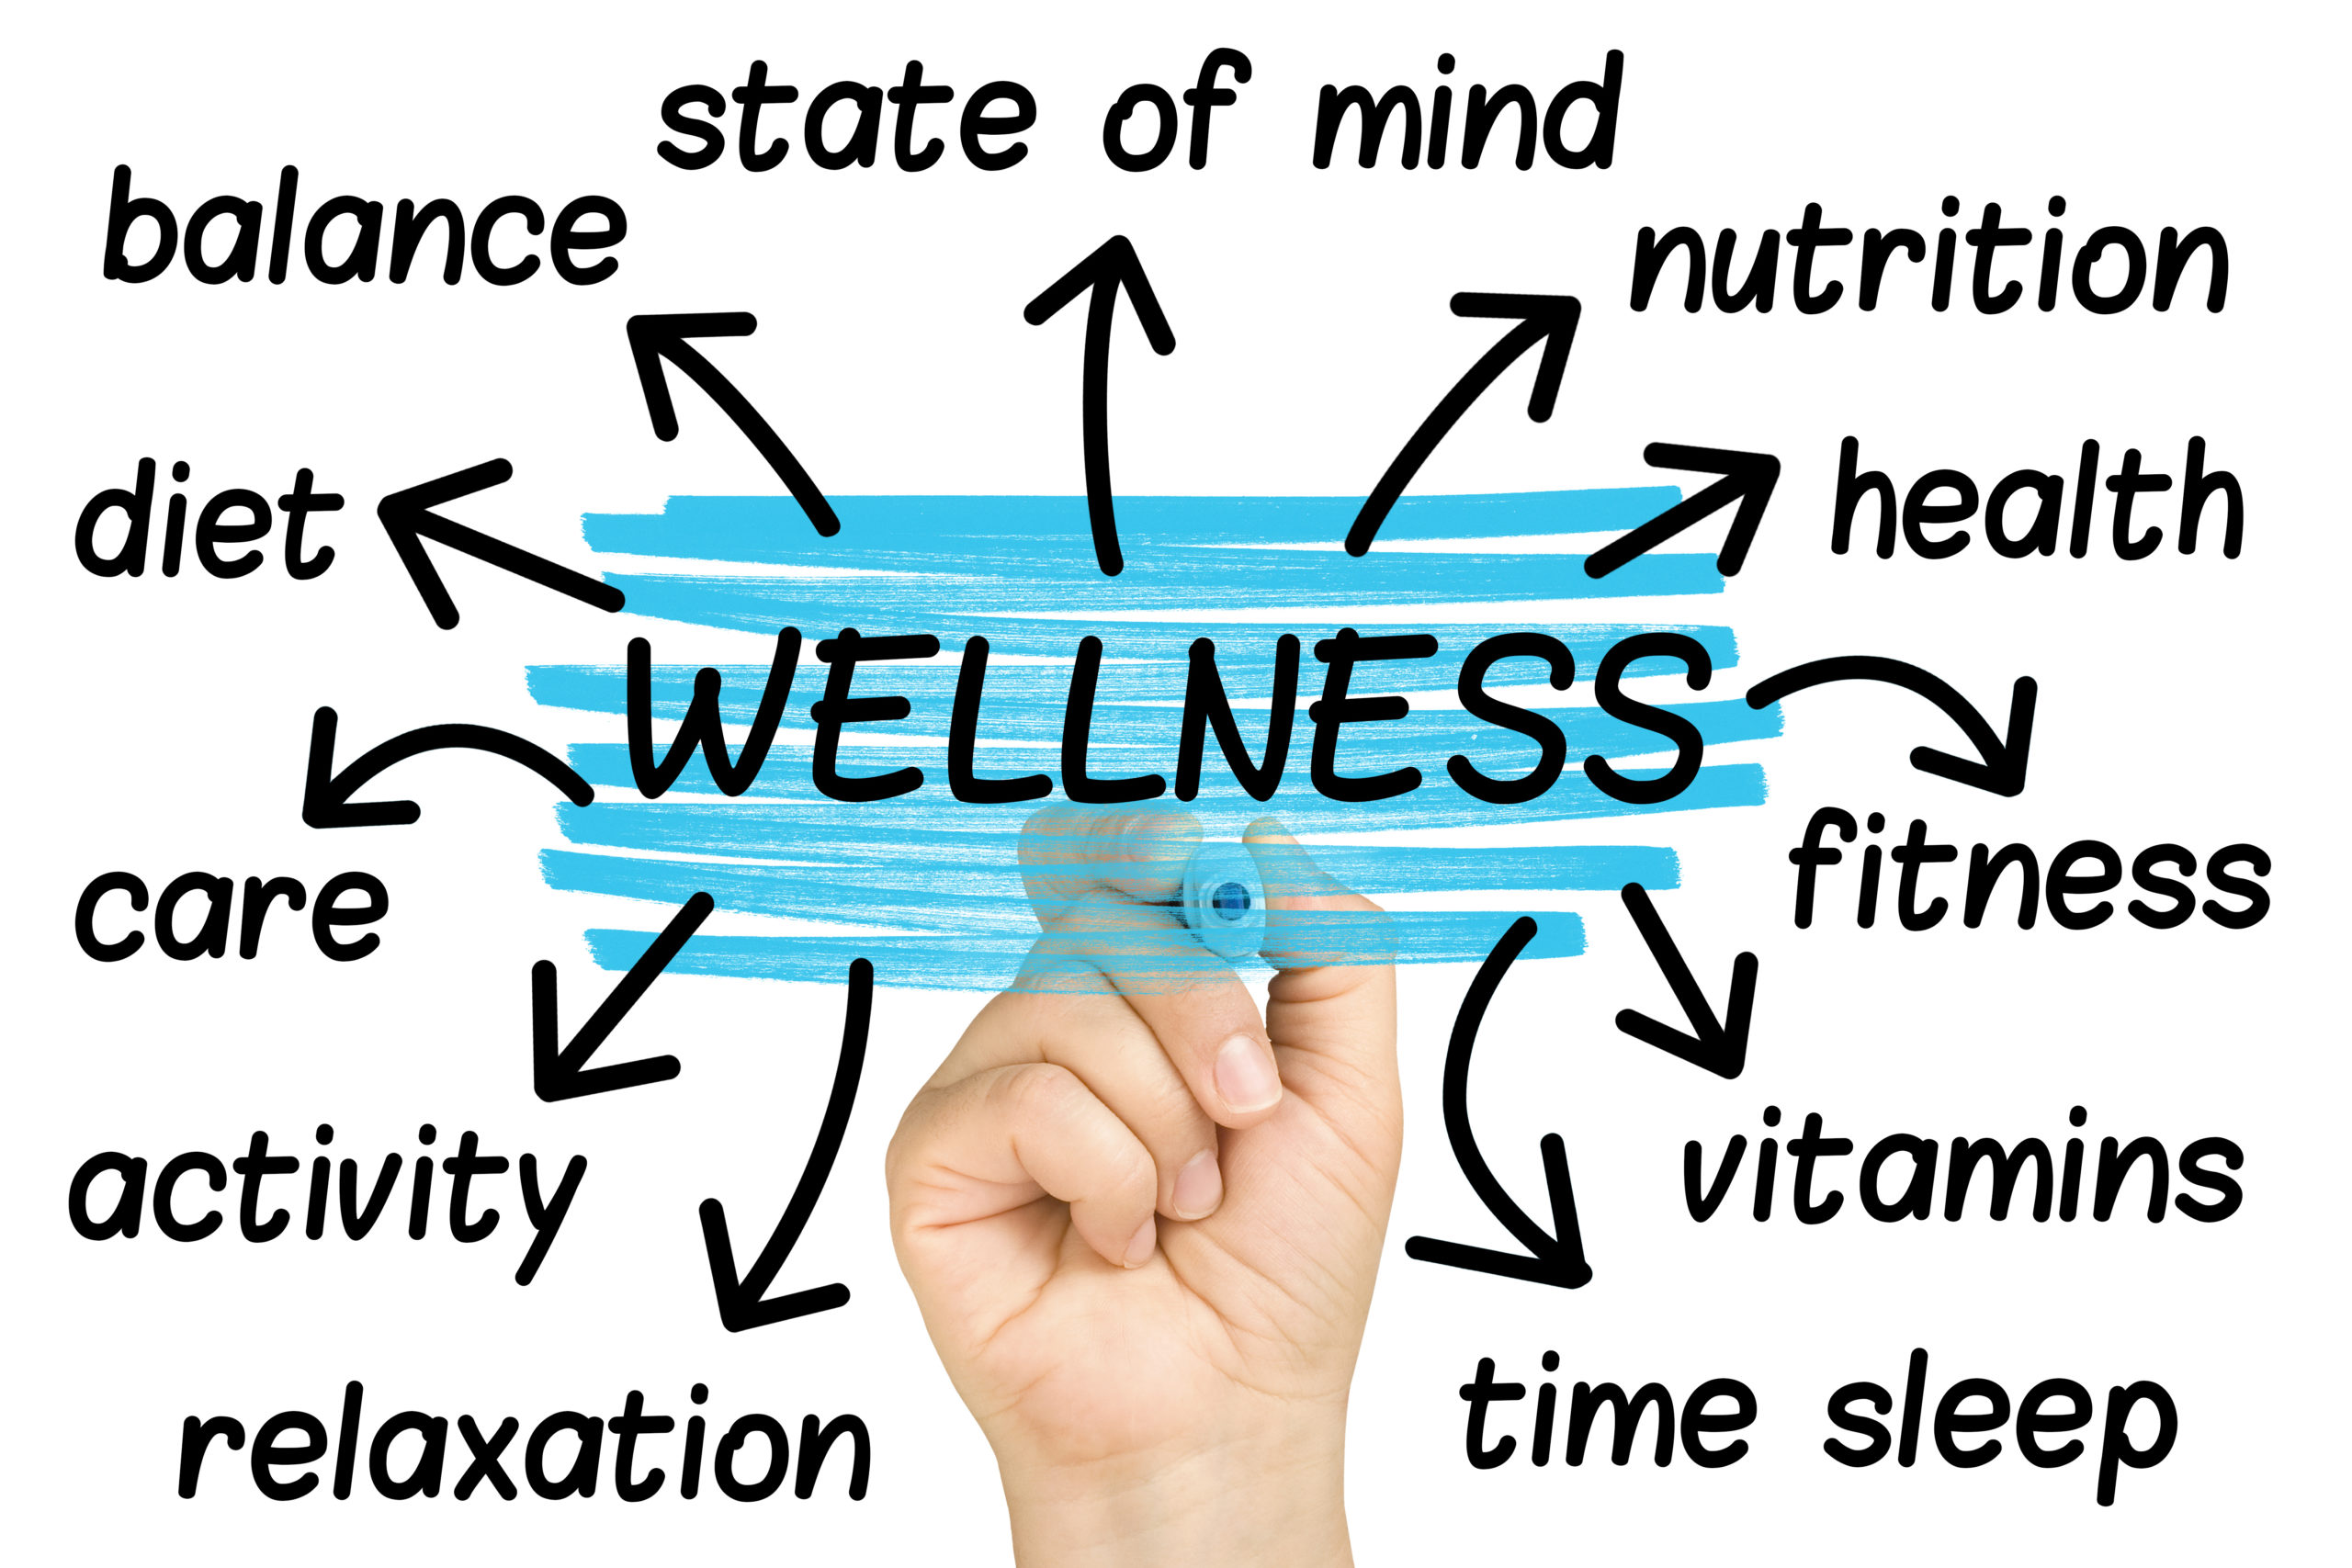 Mesothelioma Centers of Excellence Provide Opportunities to Improve Wellness